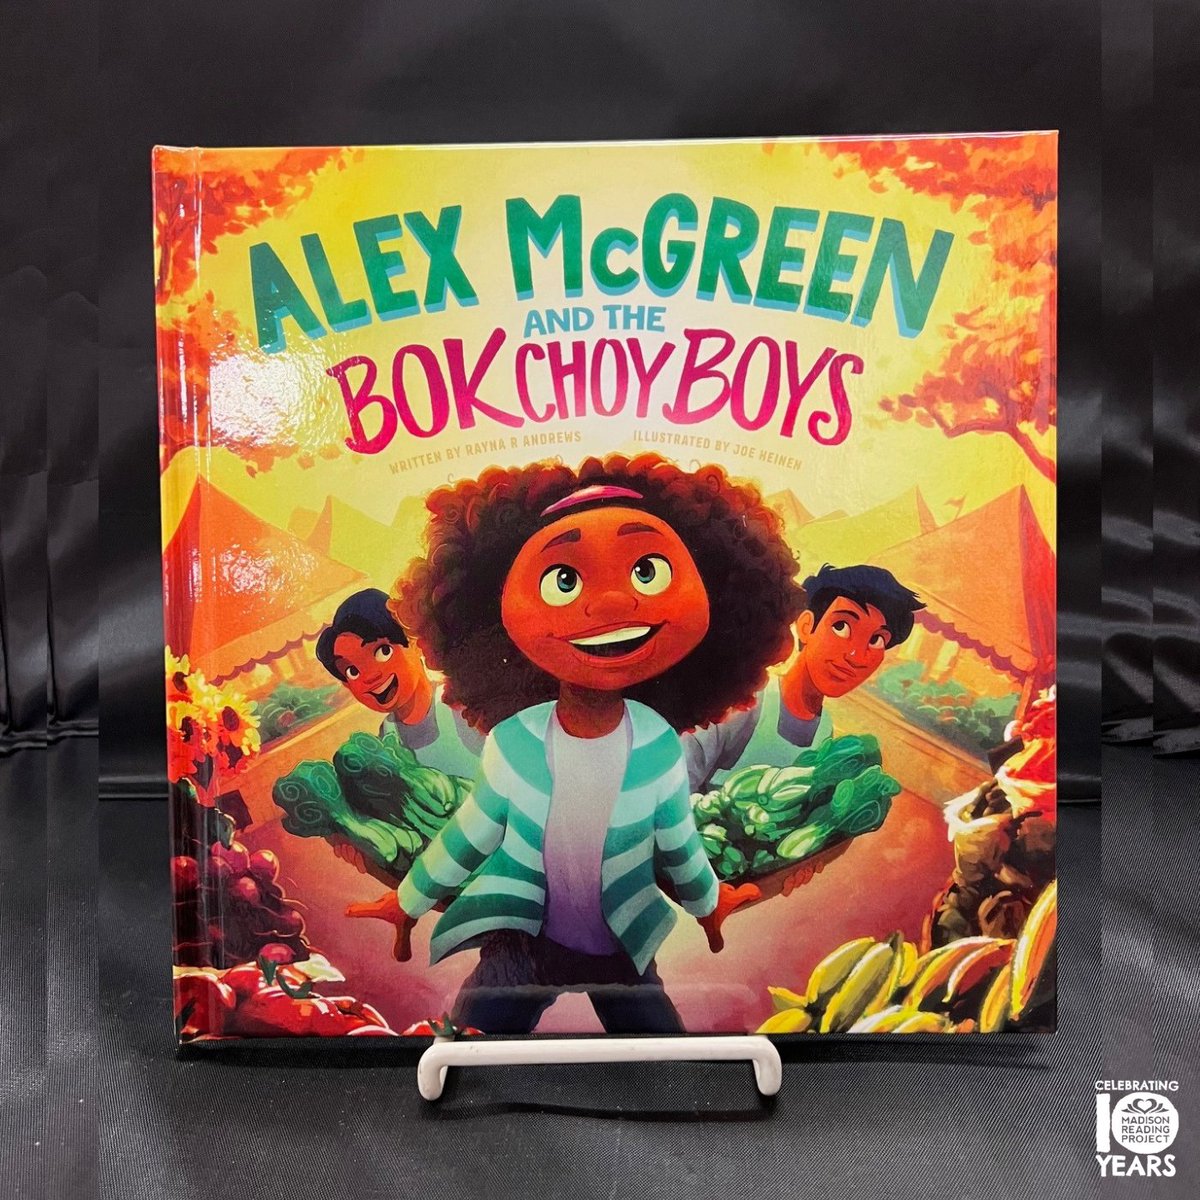 🤩 New to the Book Center: Alex McGreen and the Bok Choy Boys
🖊️ Written by @rrayrashaan
✏️ Illustrated by Joe Heinen
📕 Published by @rayrashaan

In Alex McGreen’s adventure, she sets out to share her secret with everyone in her town that veggies can be a treat! #NewBookFeeling